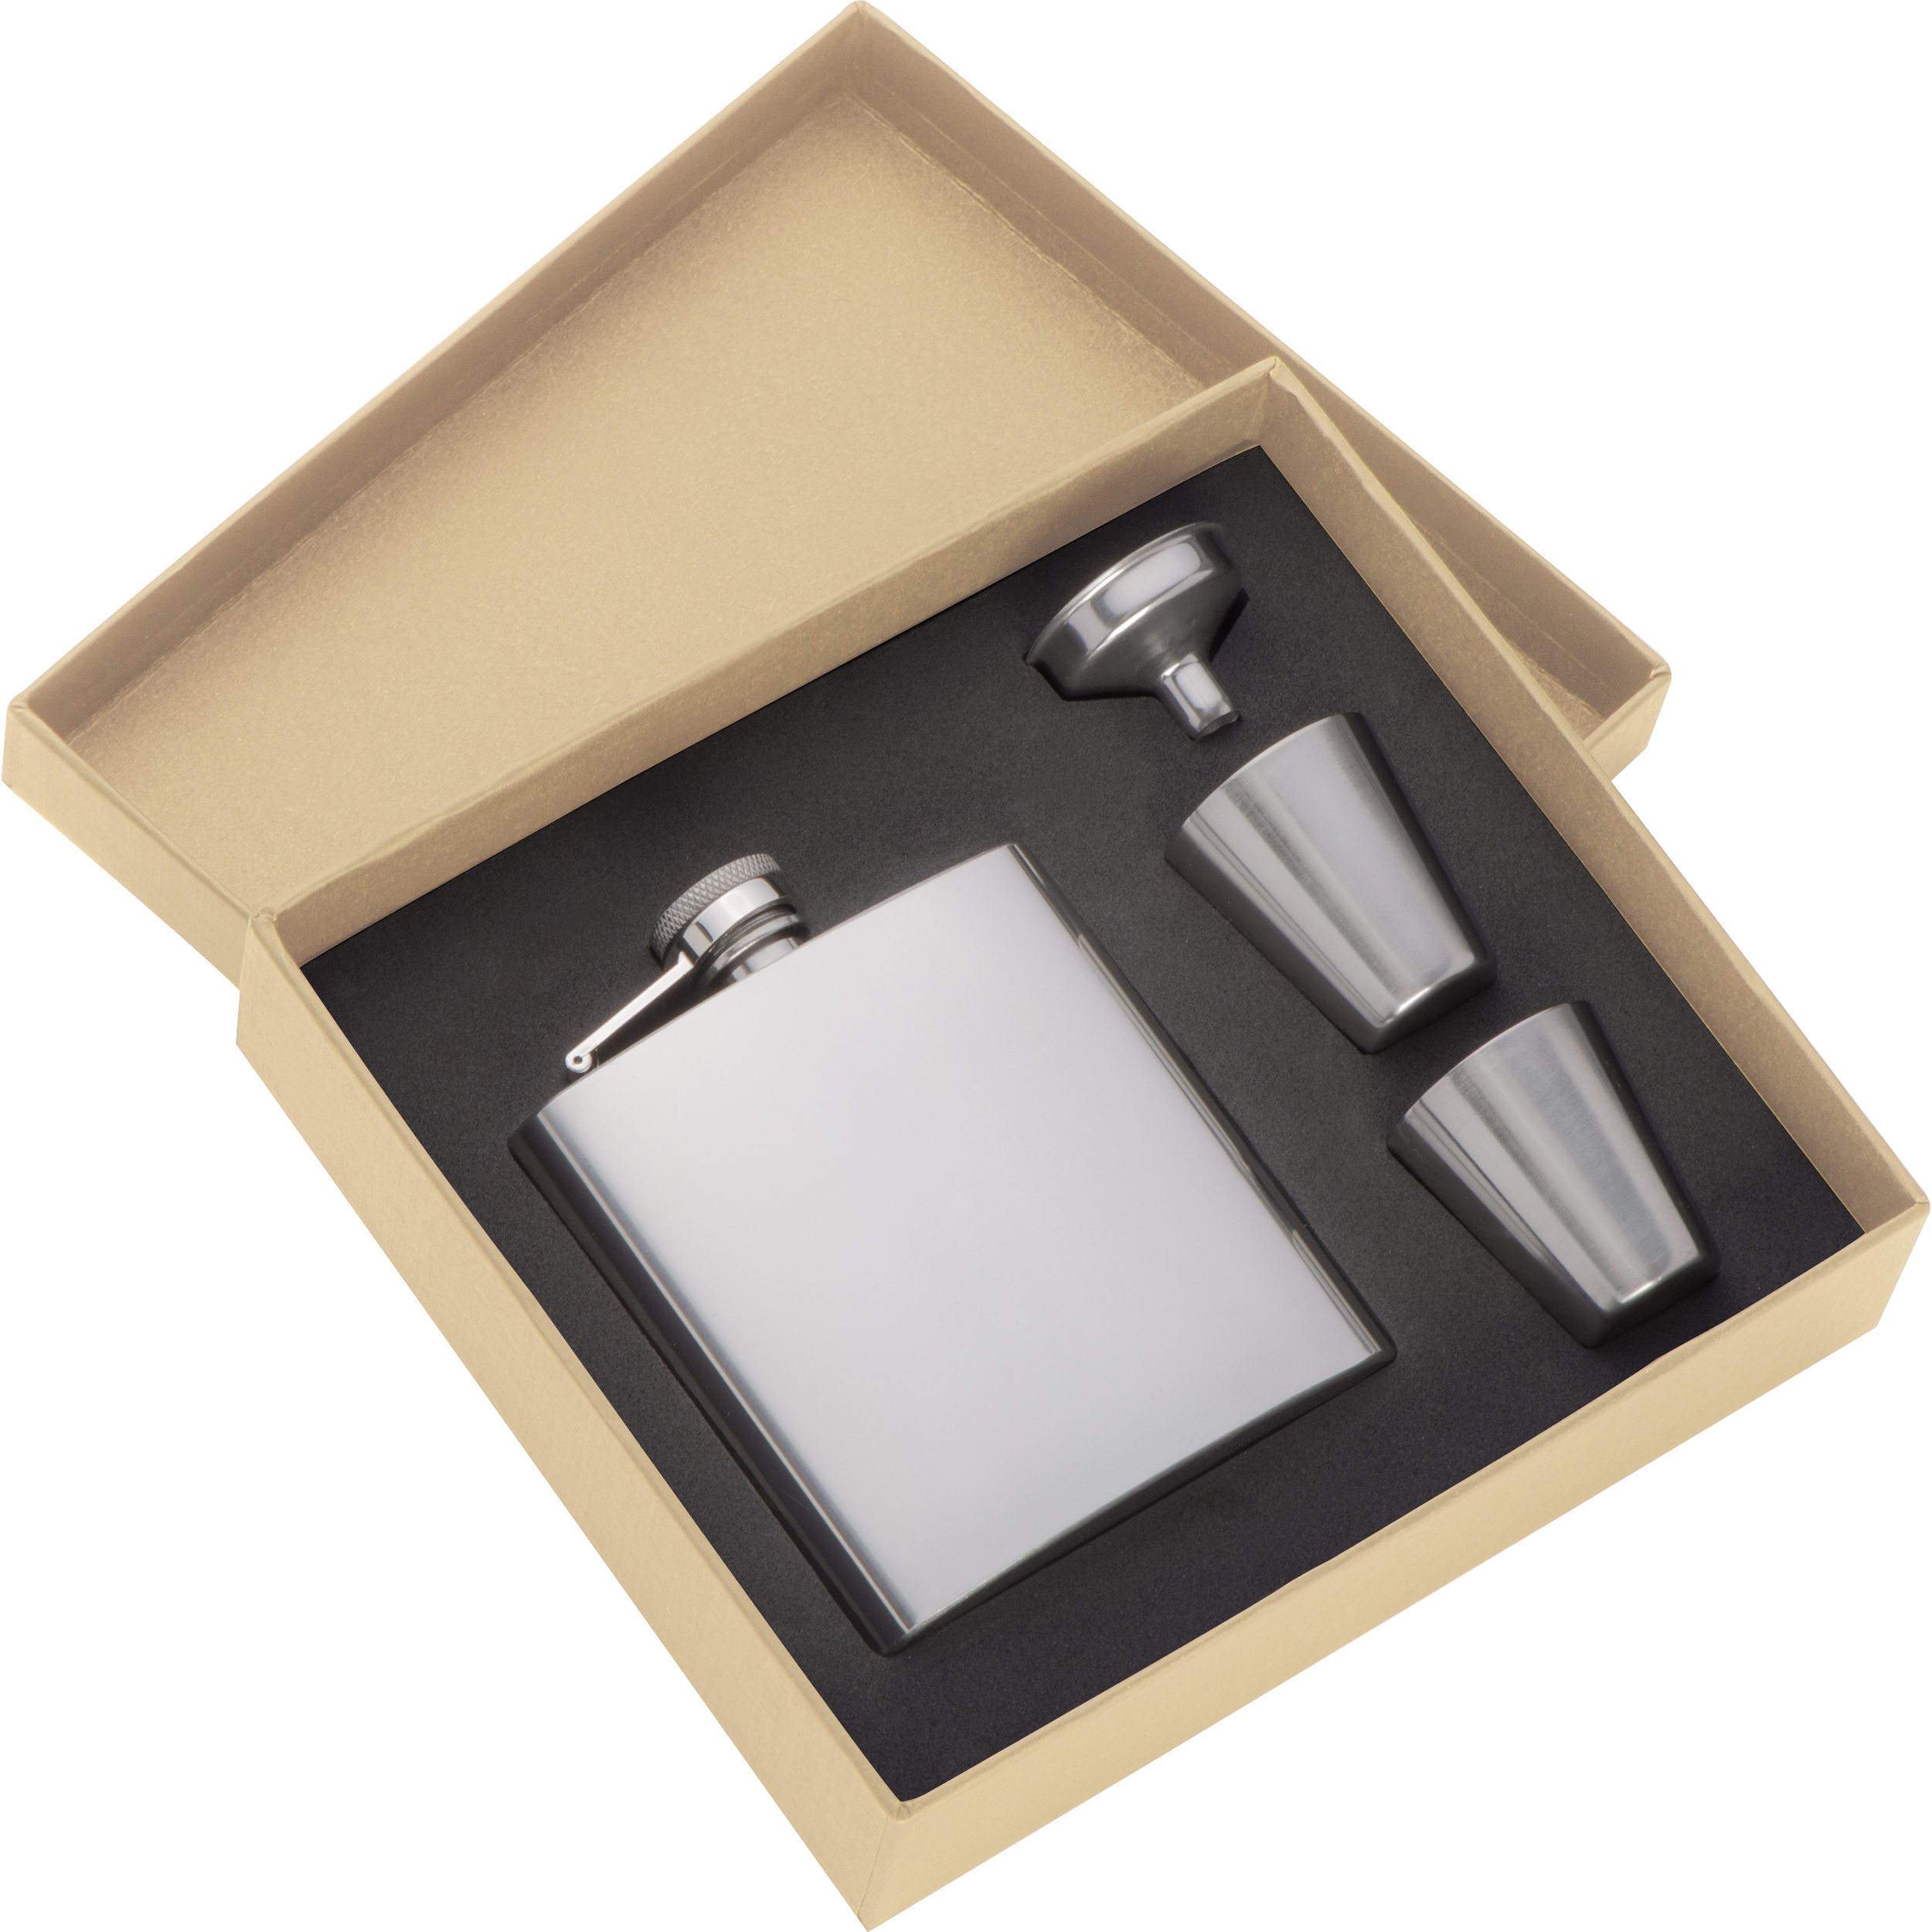 Hipflask set with 2 cups